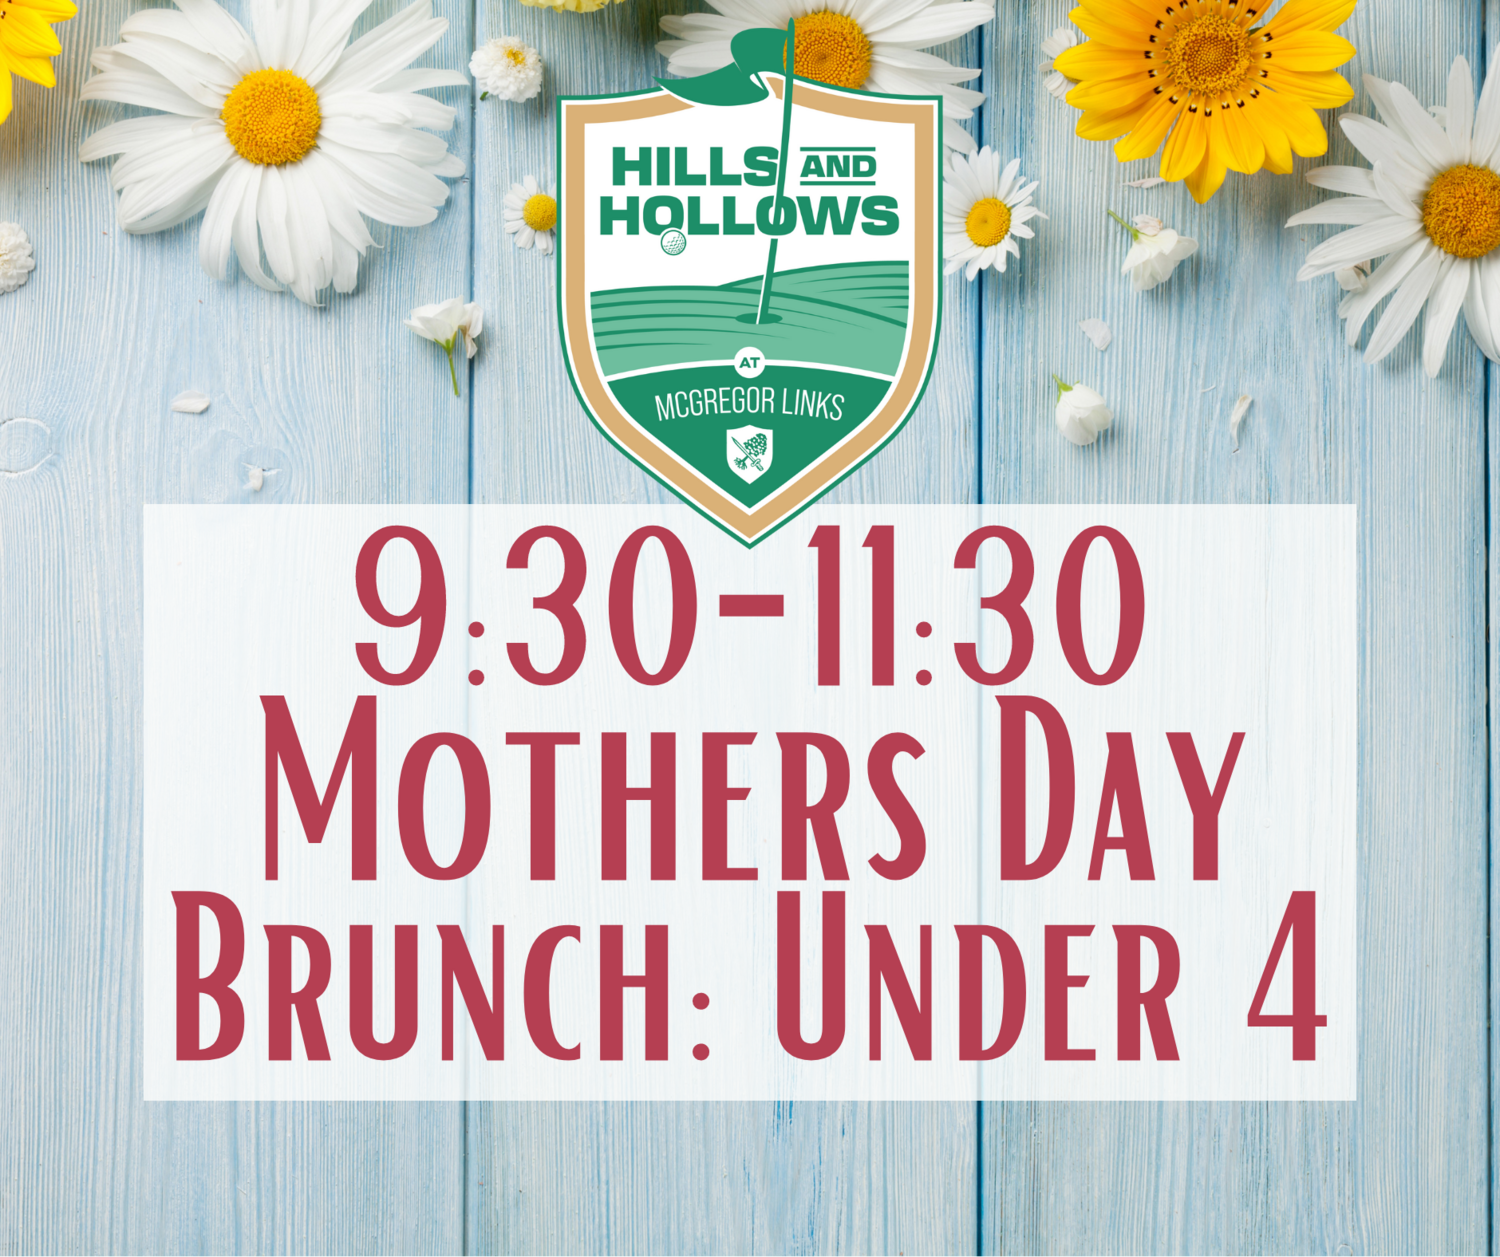 Hills & Hollows Mother's Day Brunch 9:30 seating: Under 4